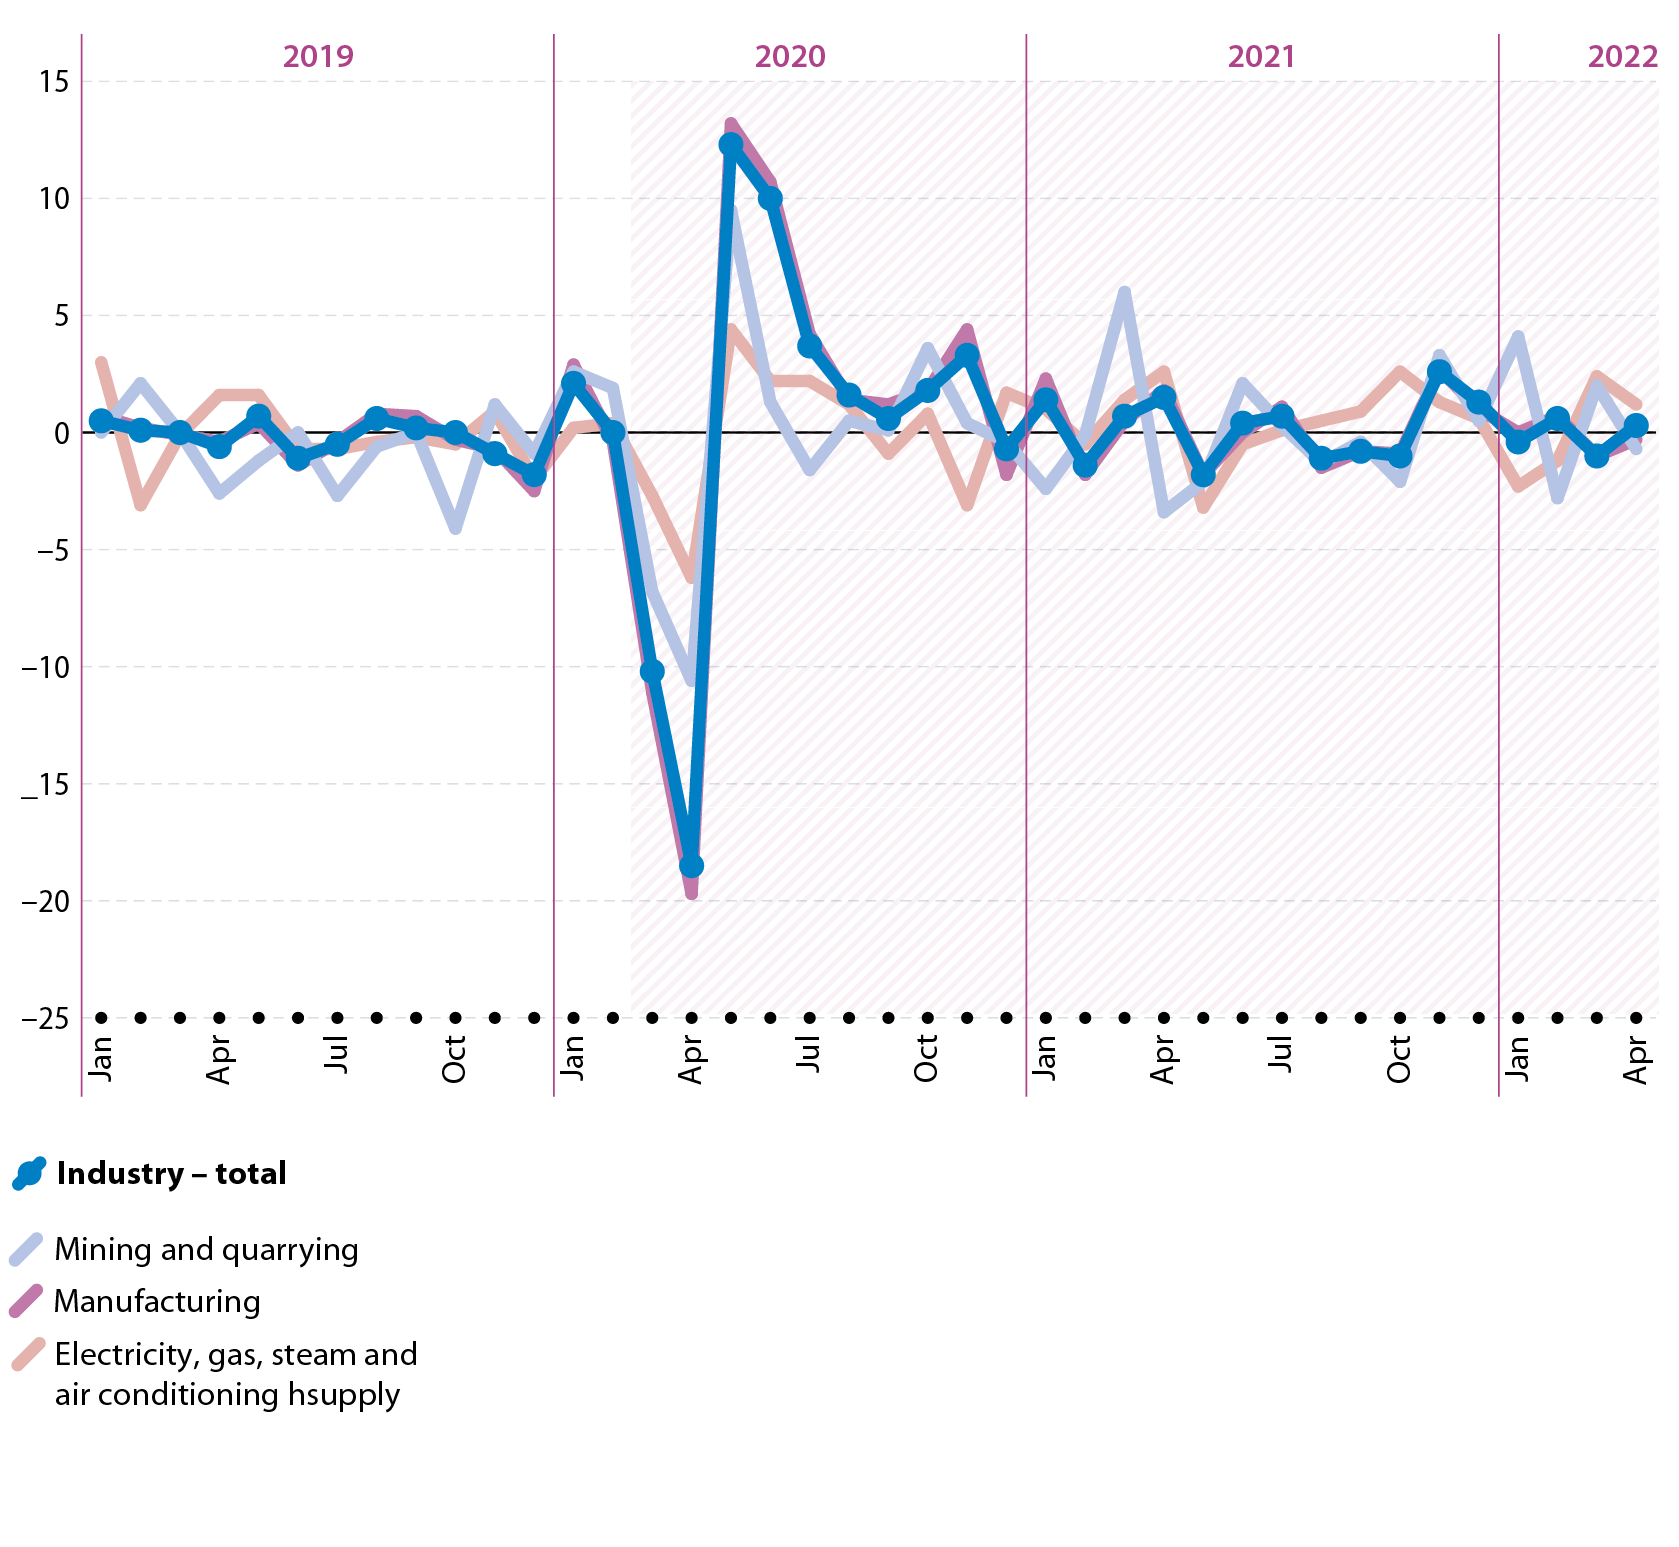 Monthly change in the production index, in percent. Data for the EU. Monthly data for January 2019 to April 2022. Industrial total and three NACE sections. Line graph. In March and April 2020, the industrial production index for the EU fell strongly, reflecting the impact of the COVID-19 crisis. It recovered strongly in May and June. Its monthly development thereafter was somewhat more volatile than before the pandemic, but considerably less so than during the period March to June 2020.